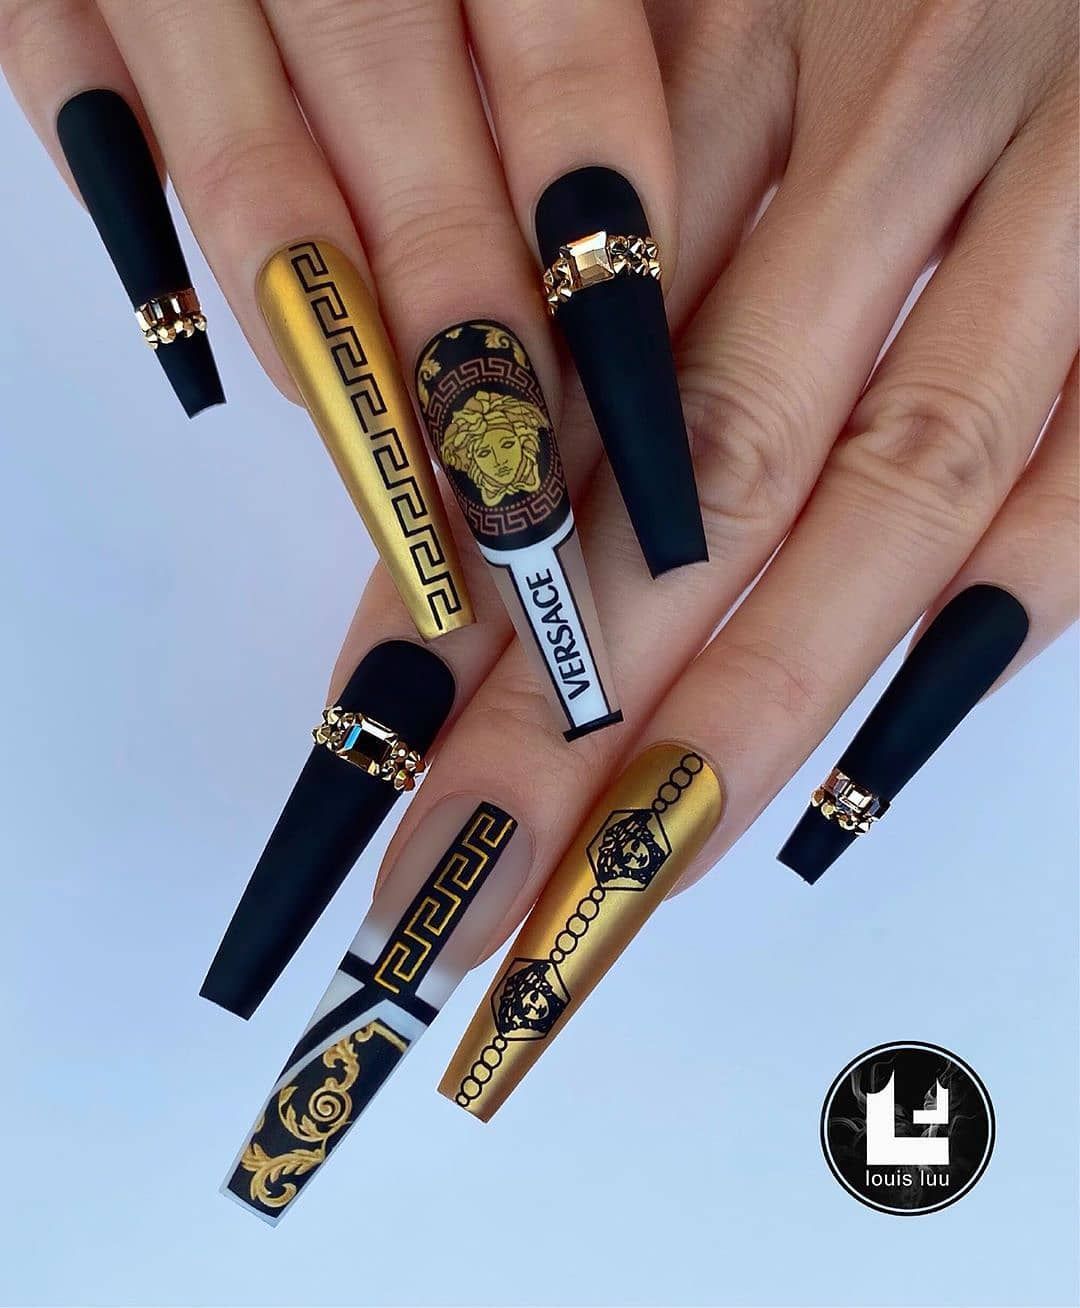 Branded-Luxury-Nails-1 Top 70+ Most Luxurious Nail Design Ideas in 2022